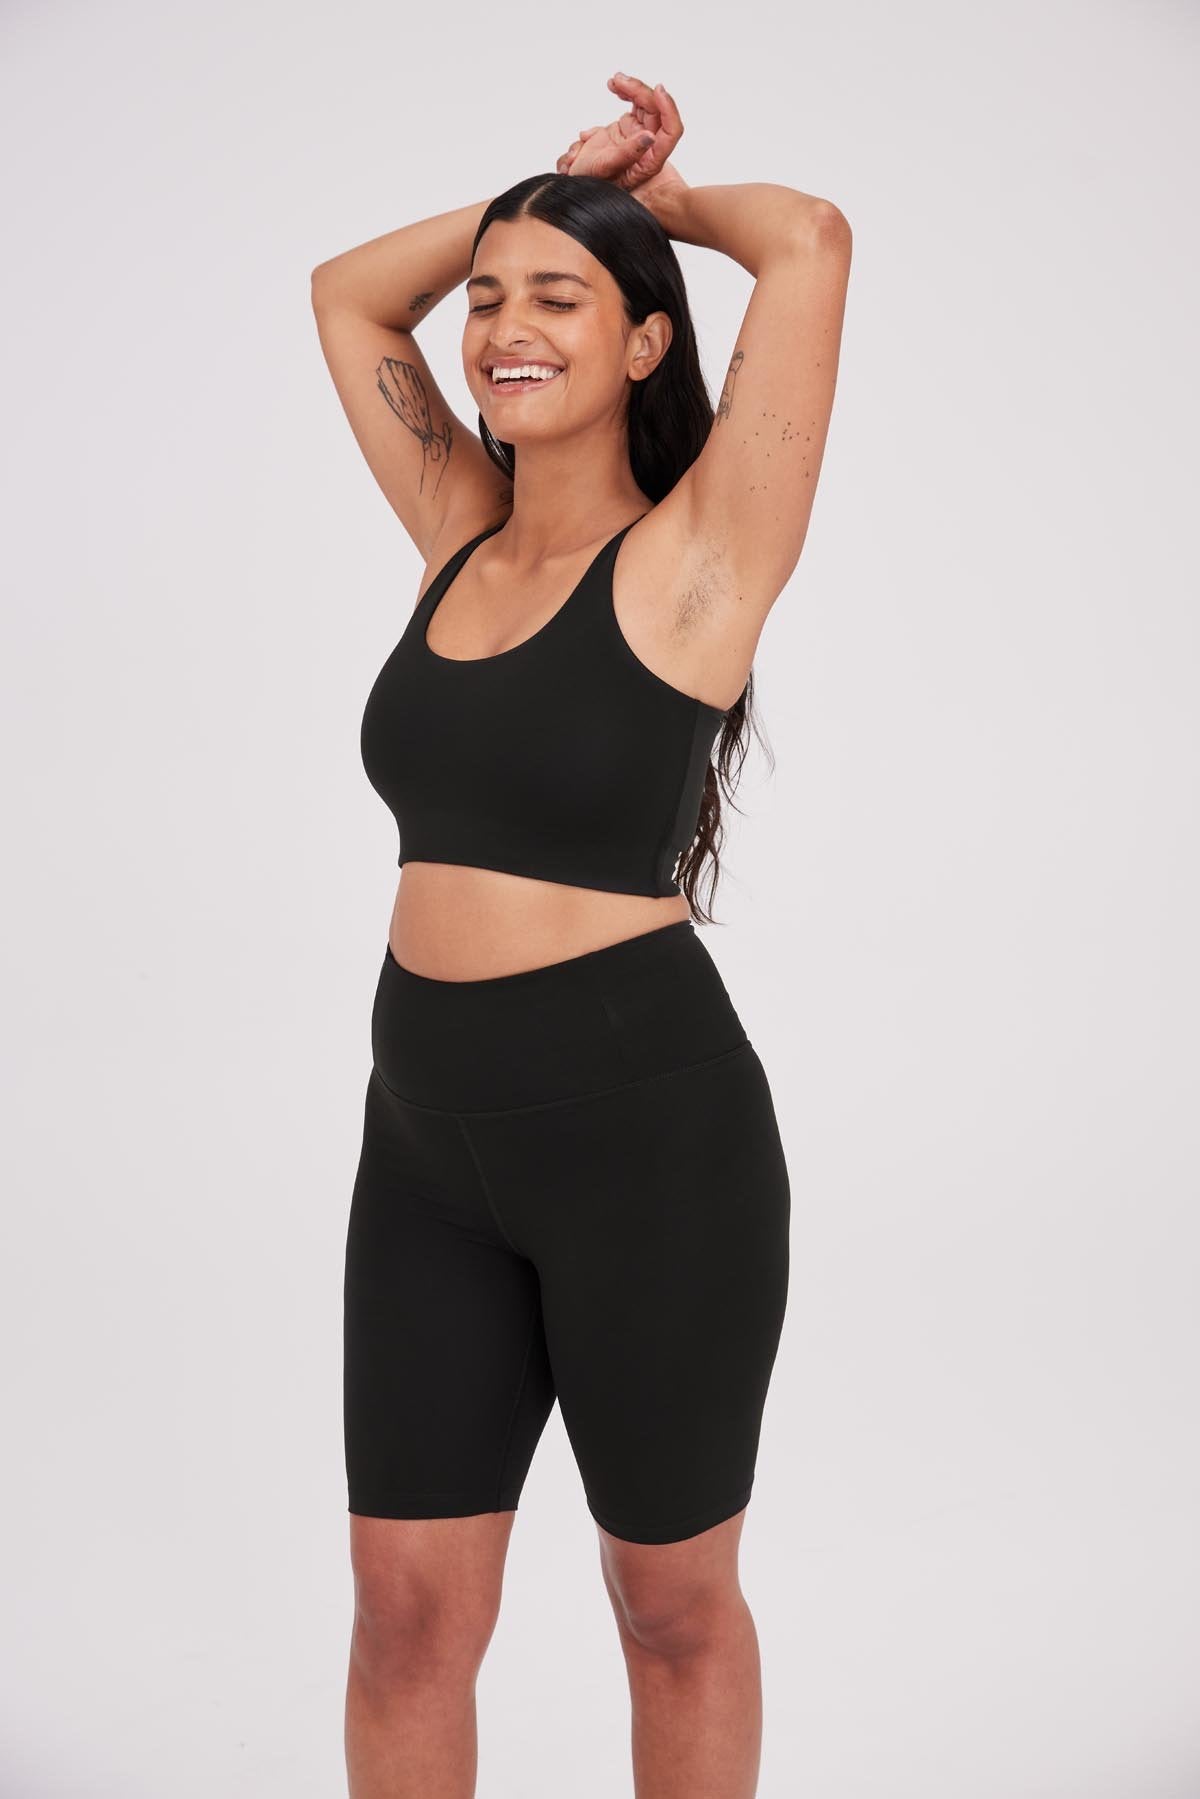 Girlfriend Collective Float Cleo Sports Bra - Women's - Clothing